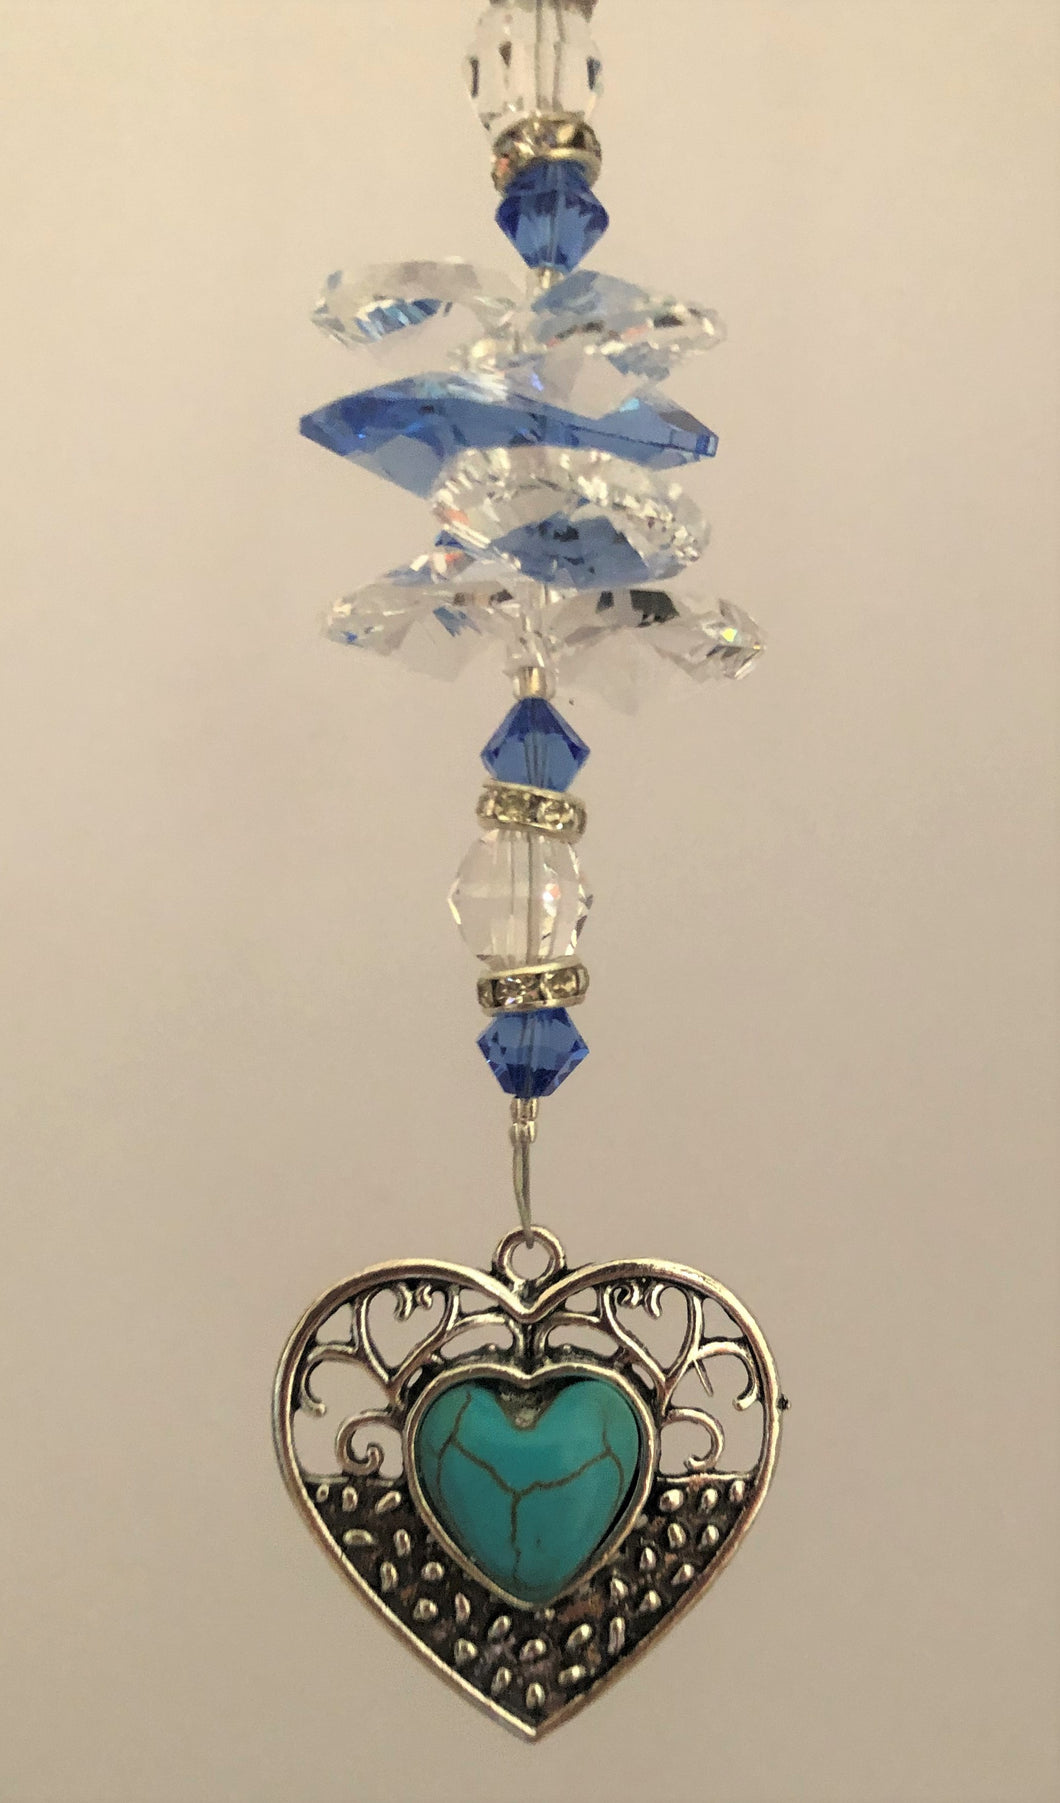 This beautiful Blue Heart suncatcher which is decorated with crystals and Lapis Lazuli